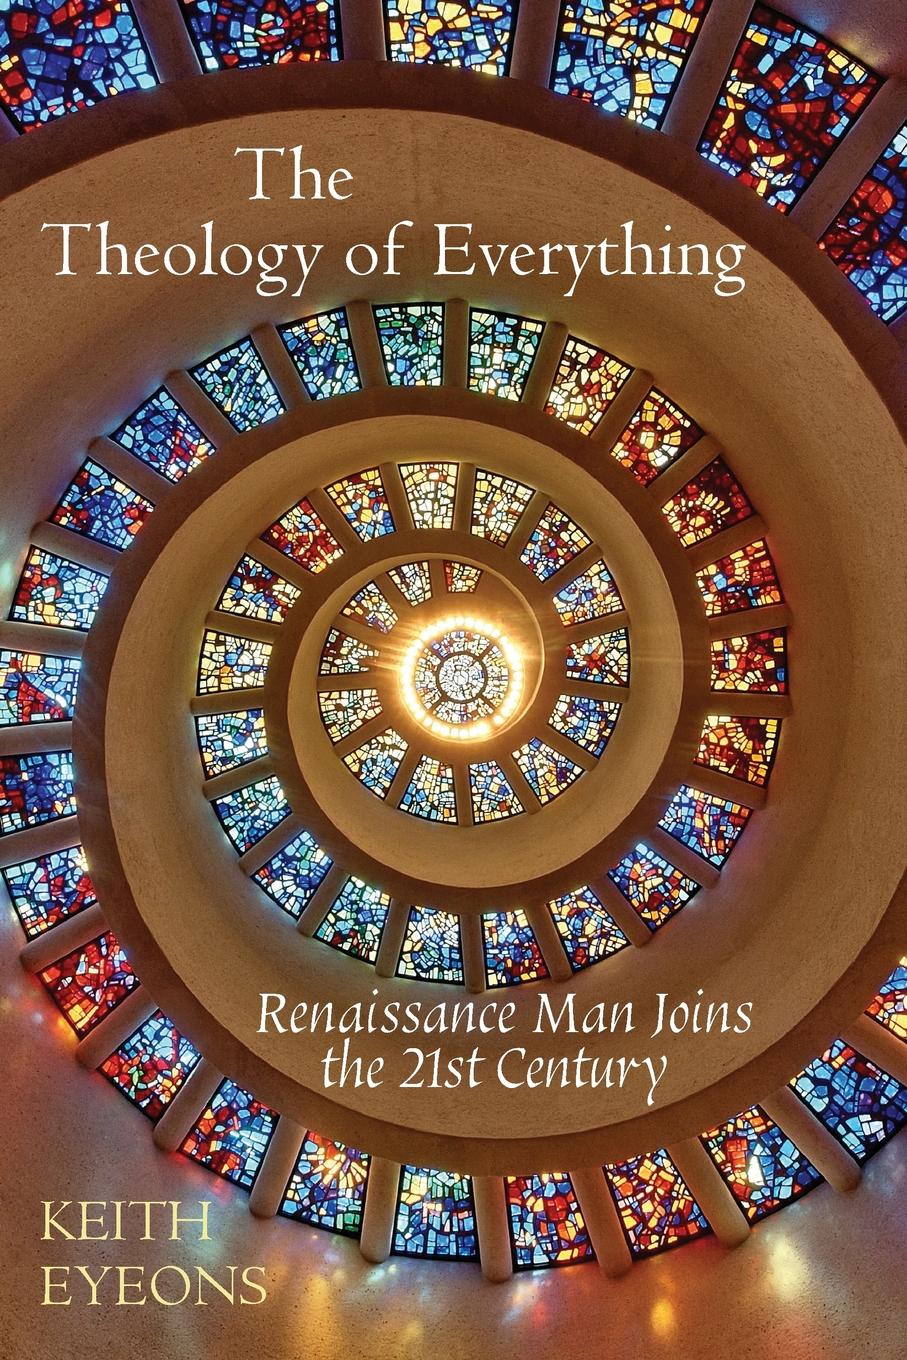 The Theology of Everything. Renaissance Man Joins the 21st Century